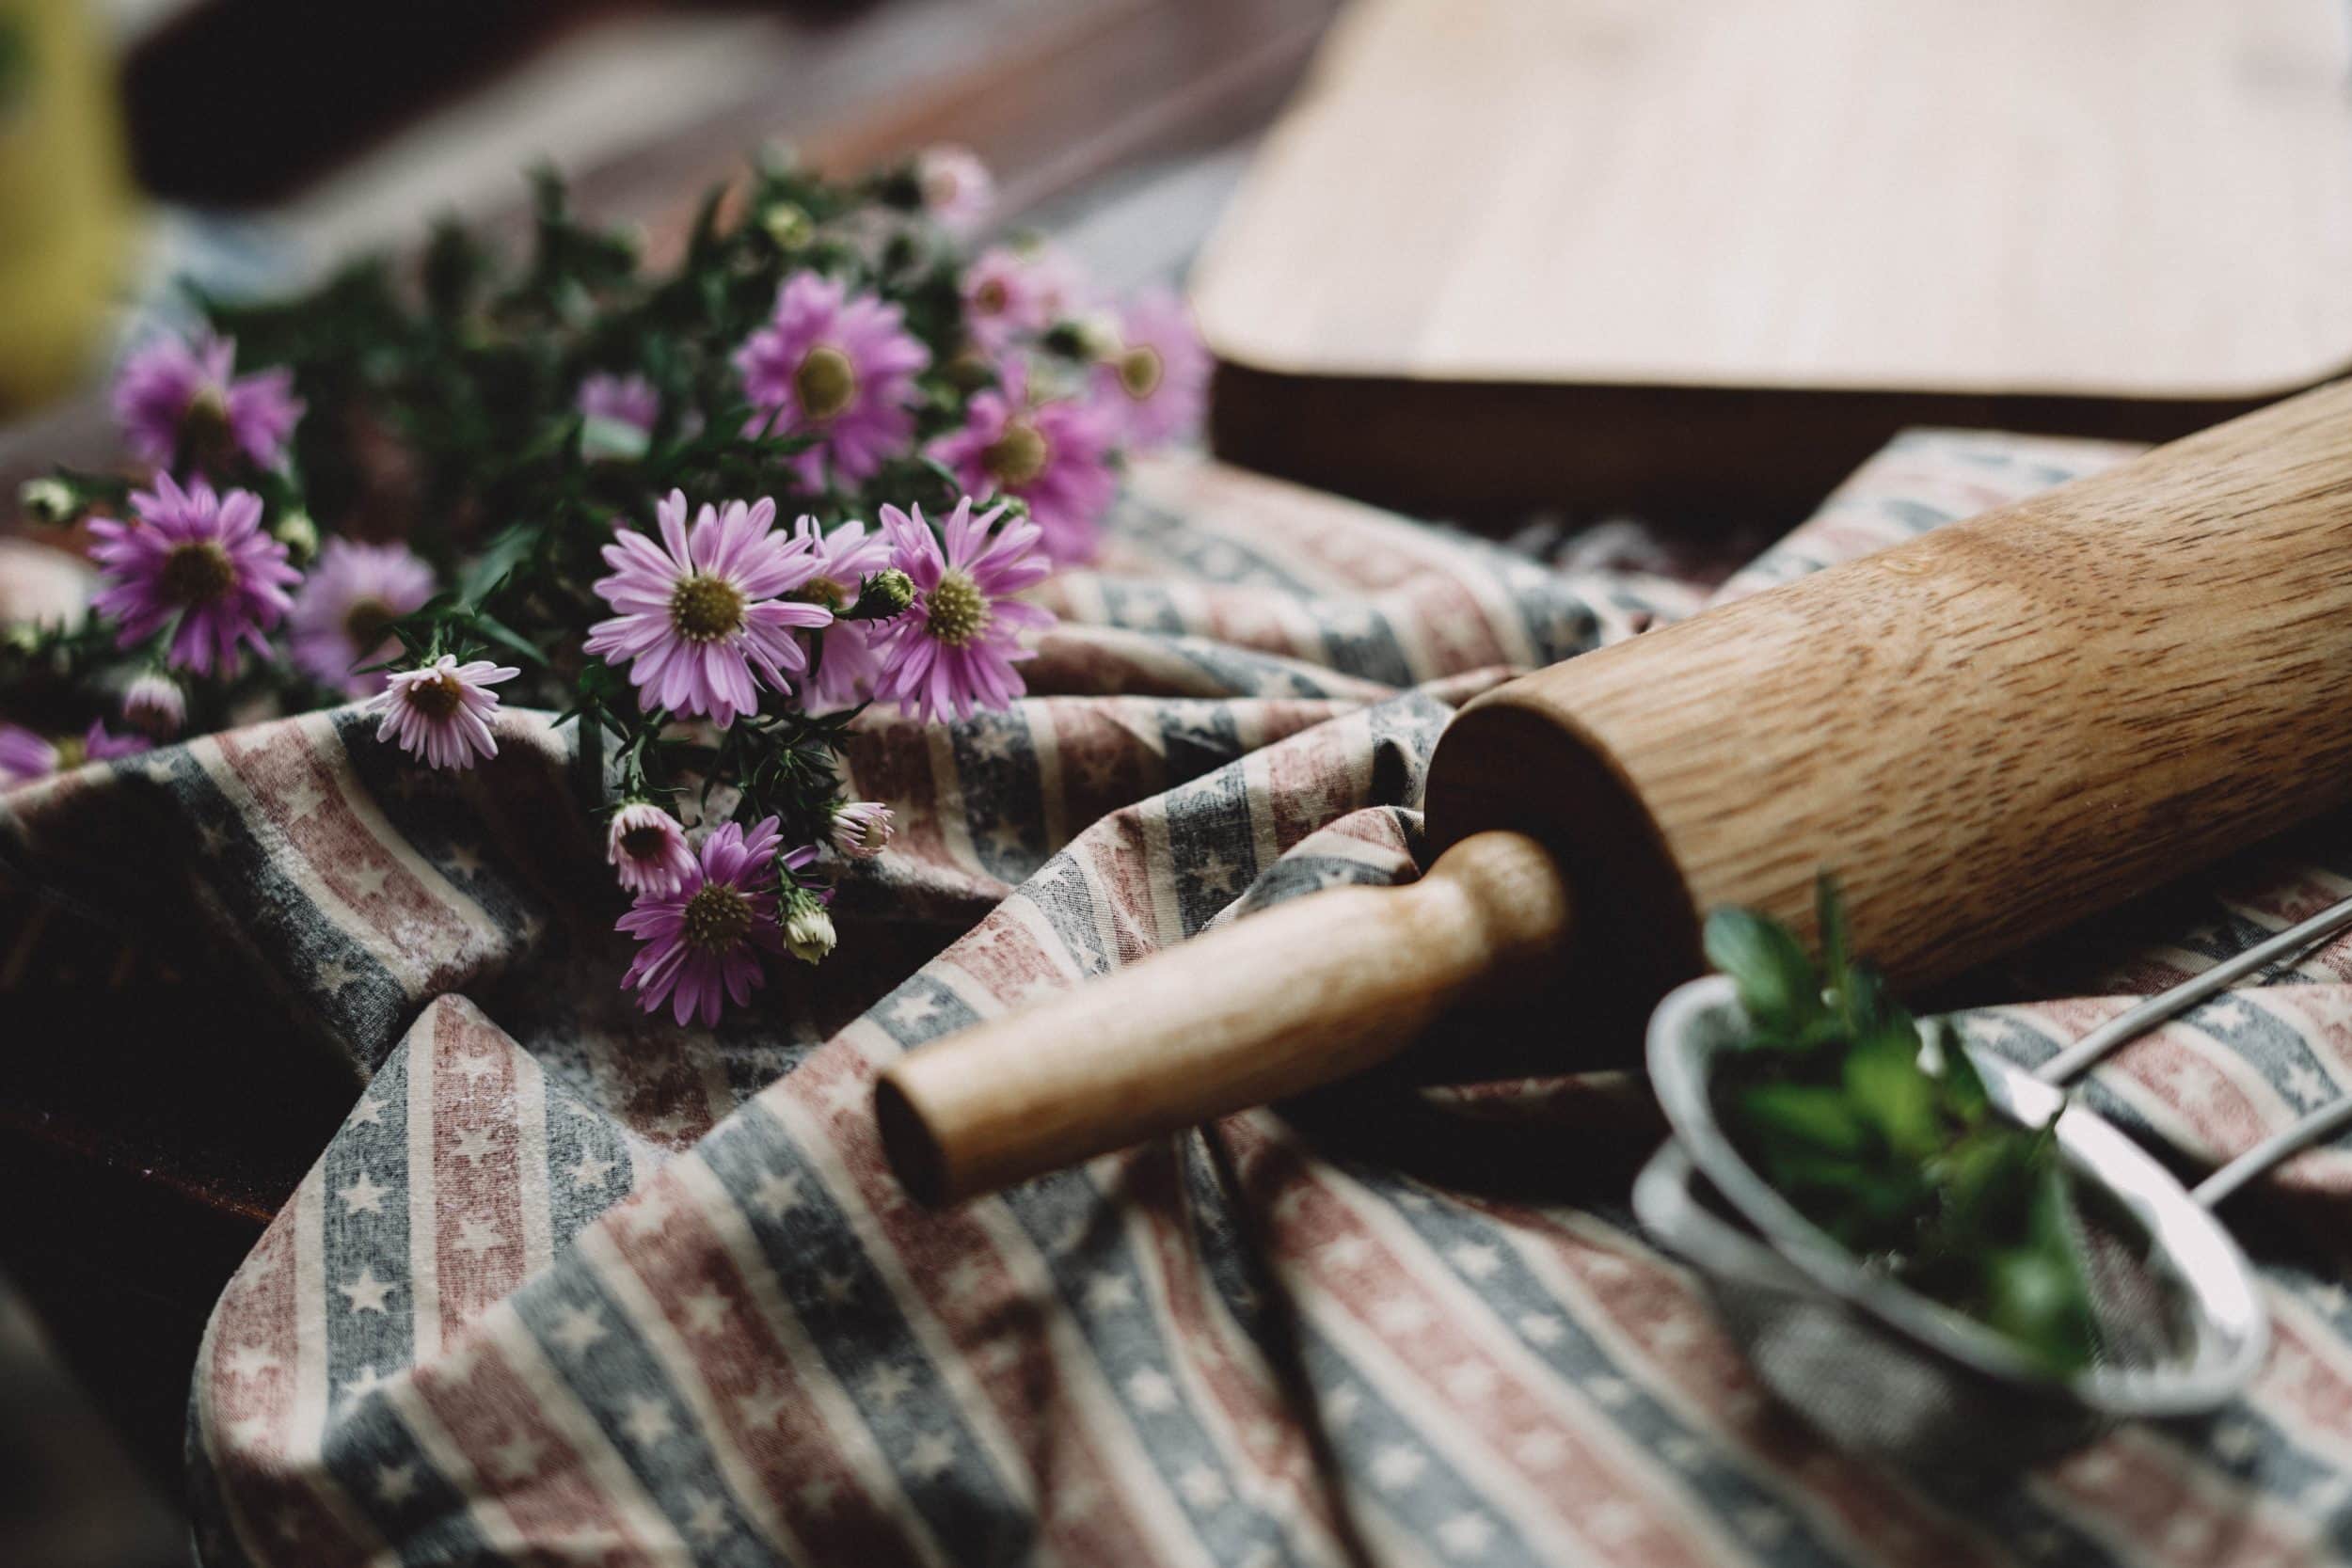 Flowers and rolling pin on striped table cloth